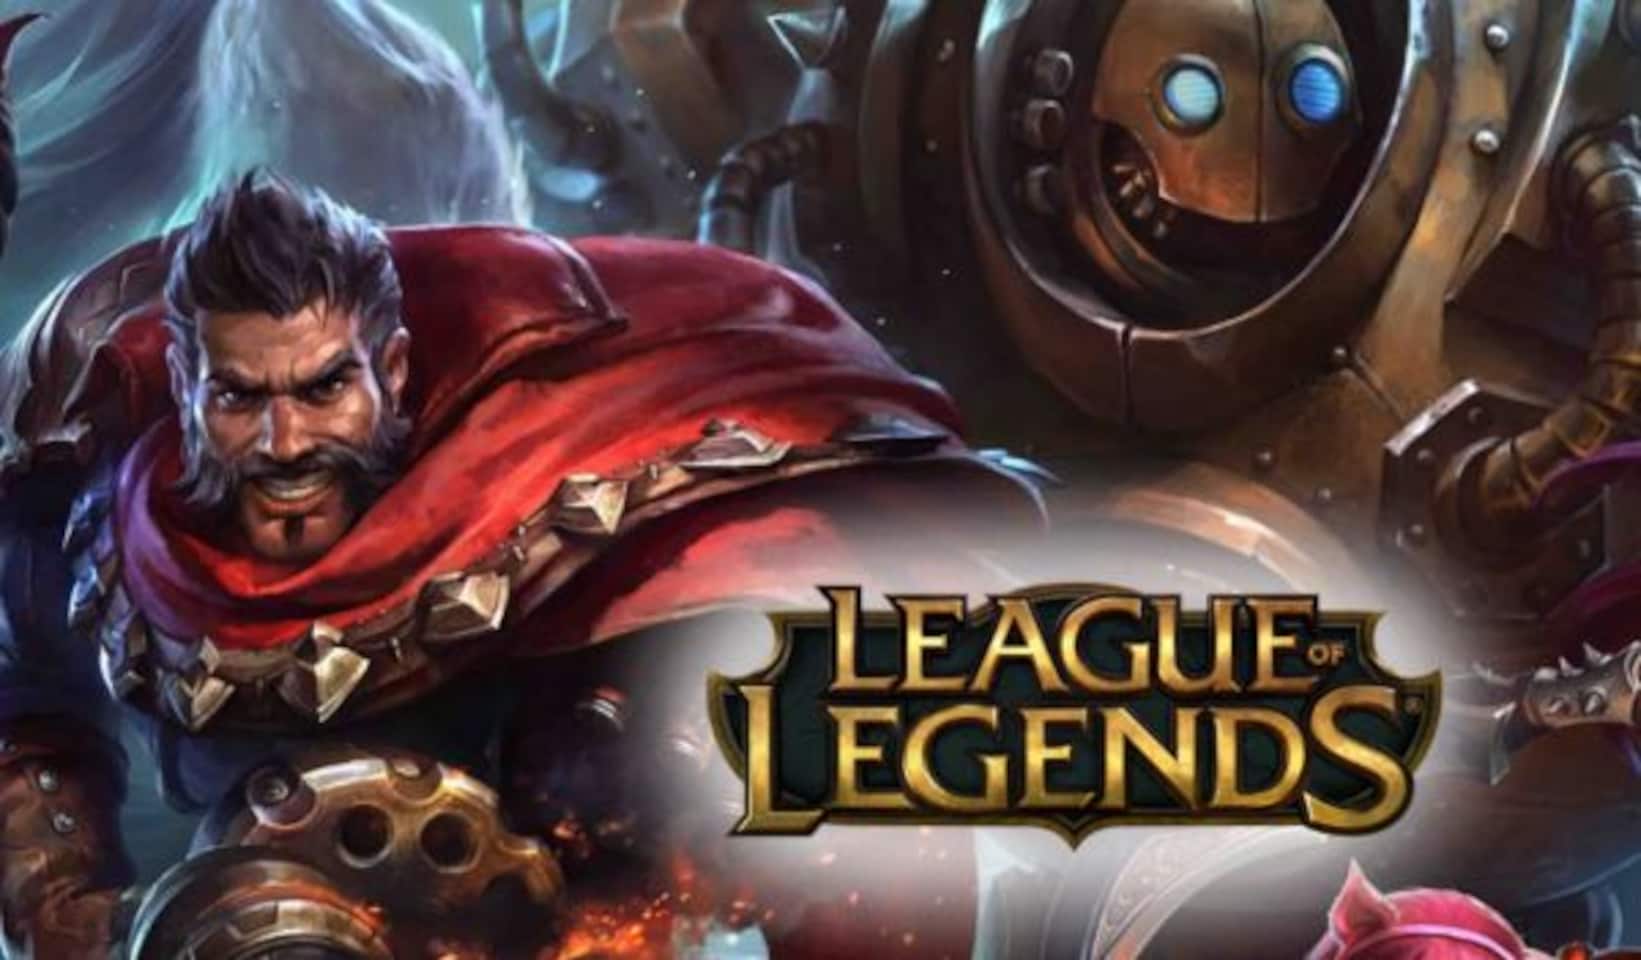 Buy League of - - Legends - Gift EUROPE Cheap Key EUR Riot Card 20